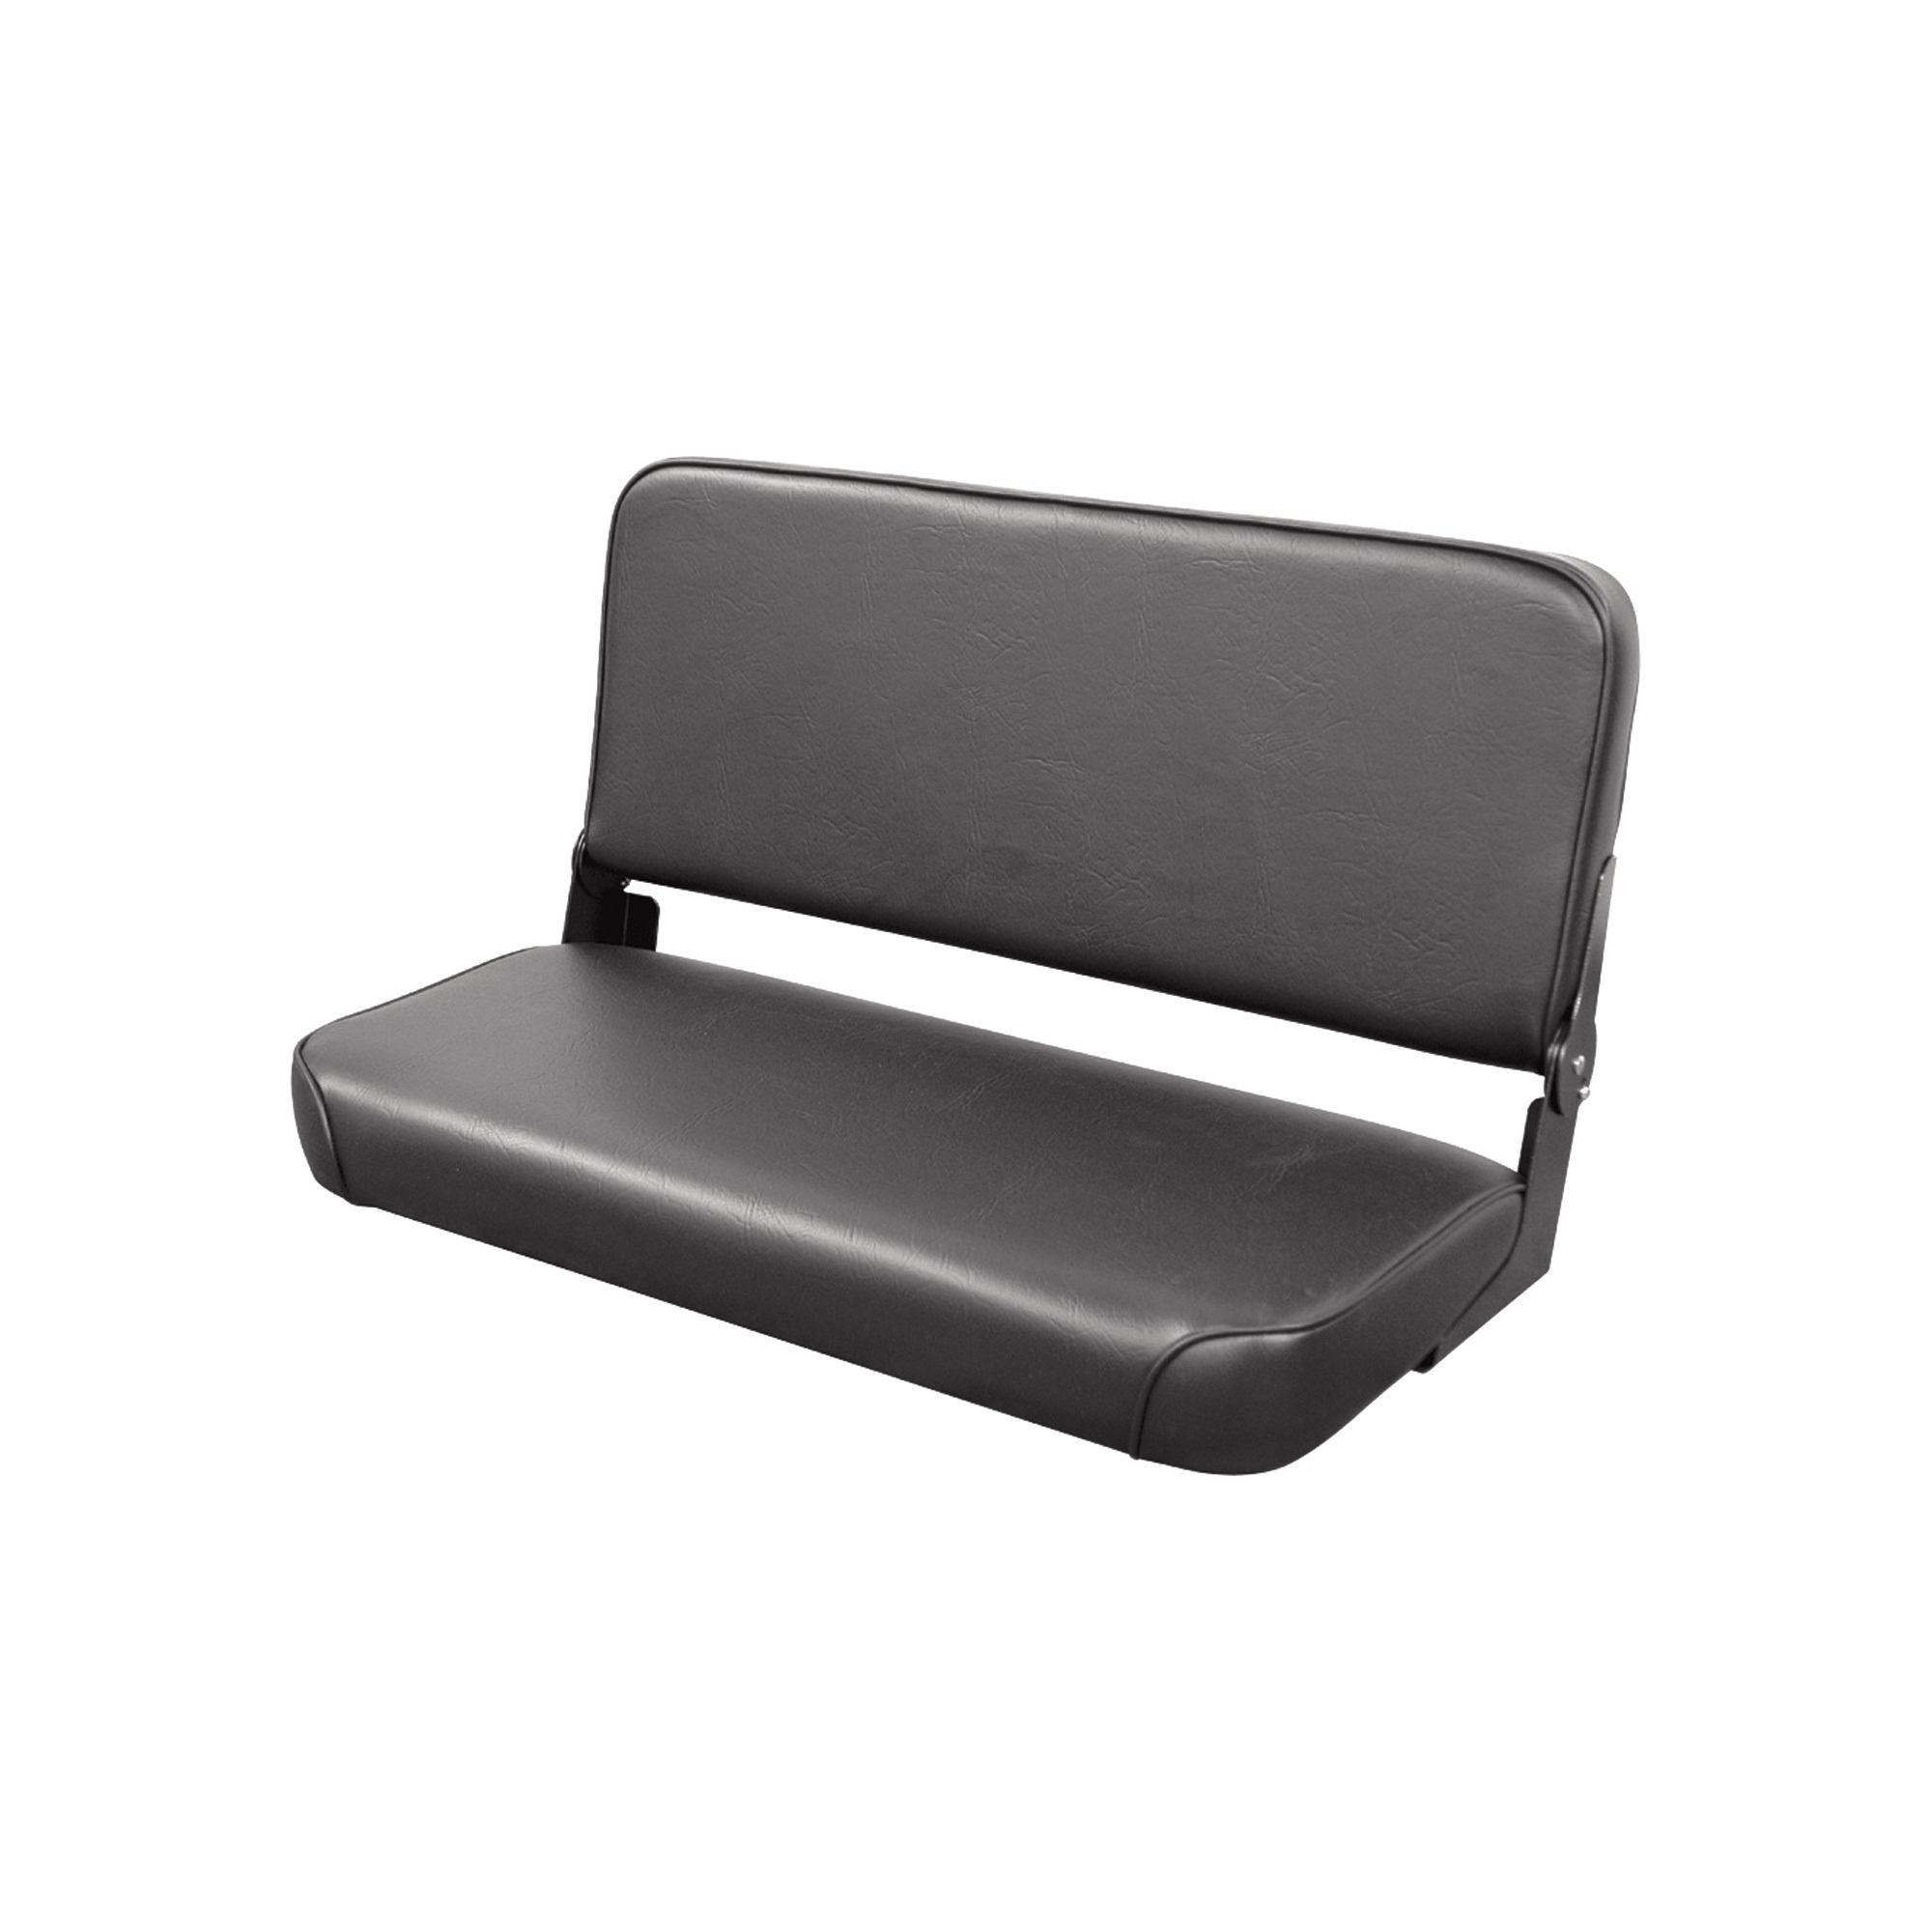 Wise Bench Seat with Folding Back â Black, Model WM1663